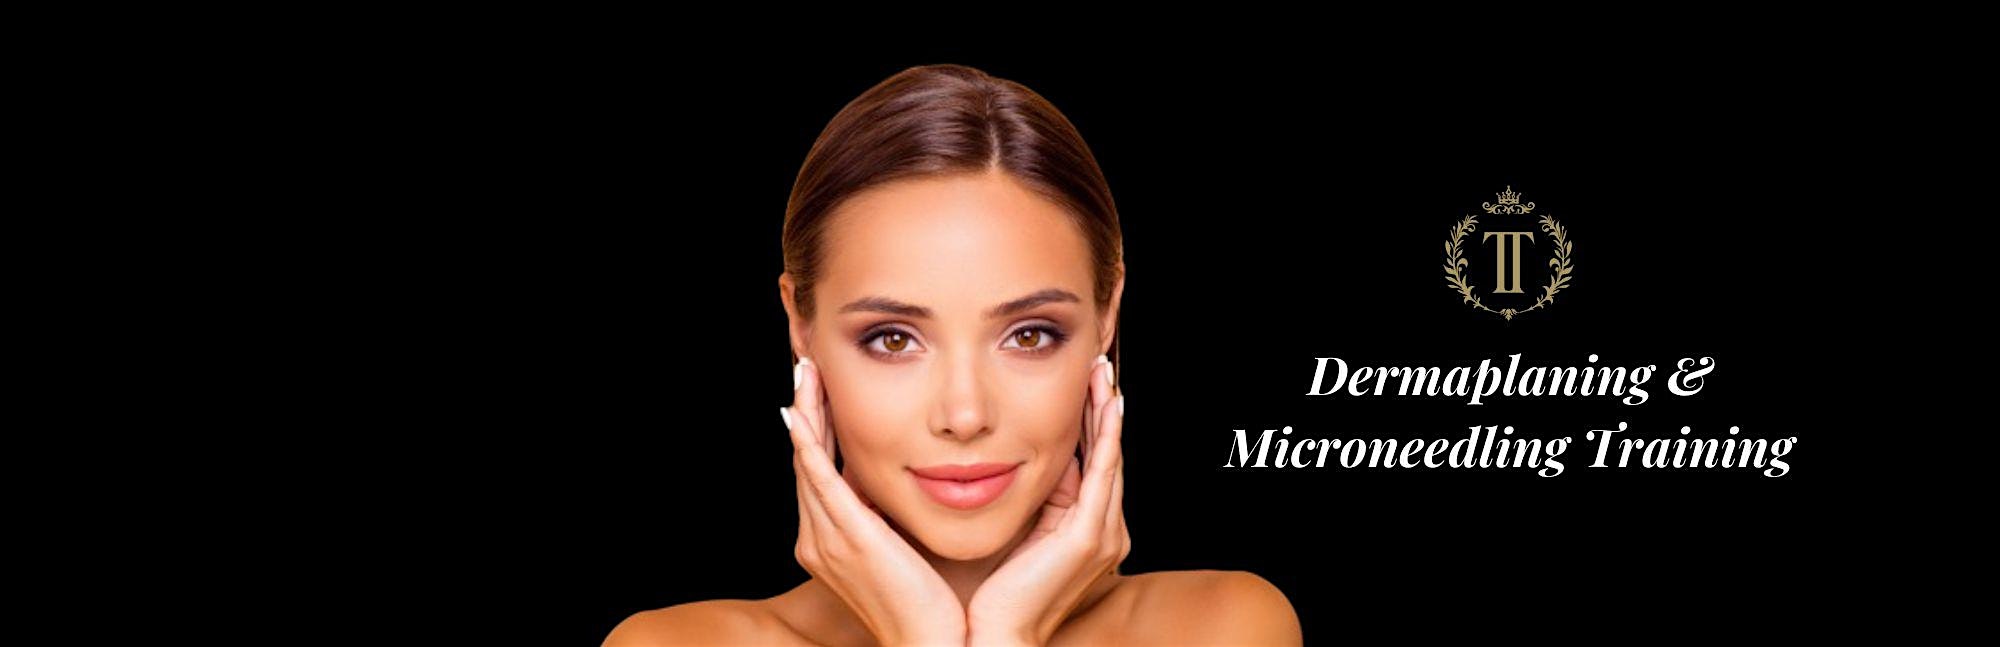 Certified 1:1 Hands-on Dermaplaning & Microneedling Training in Timmins